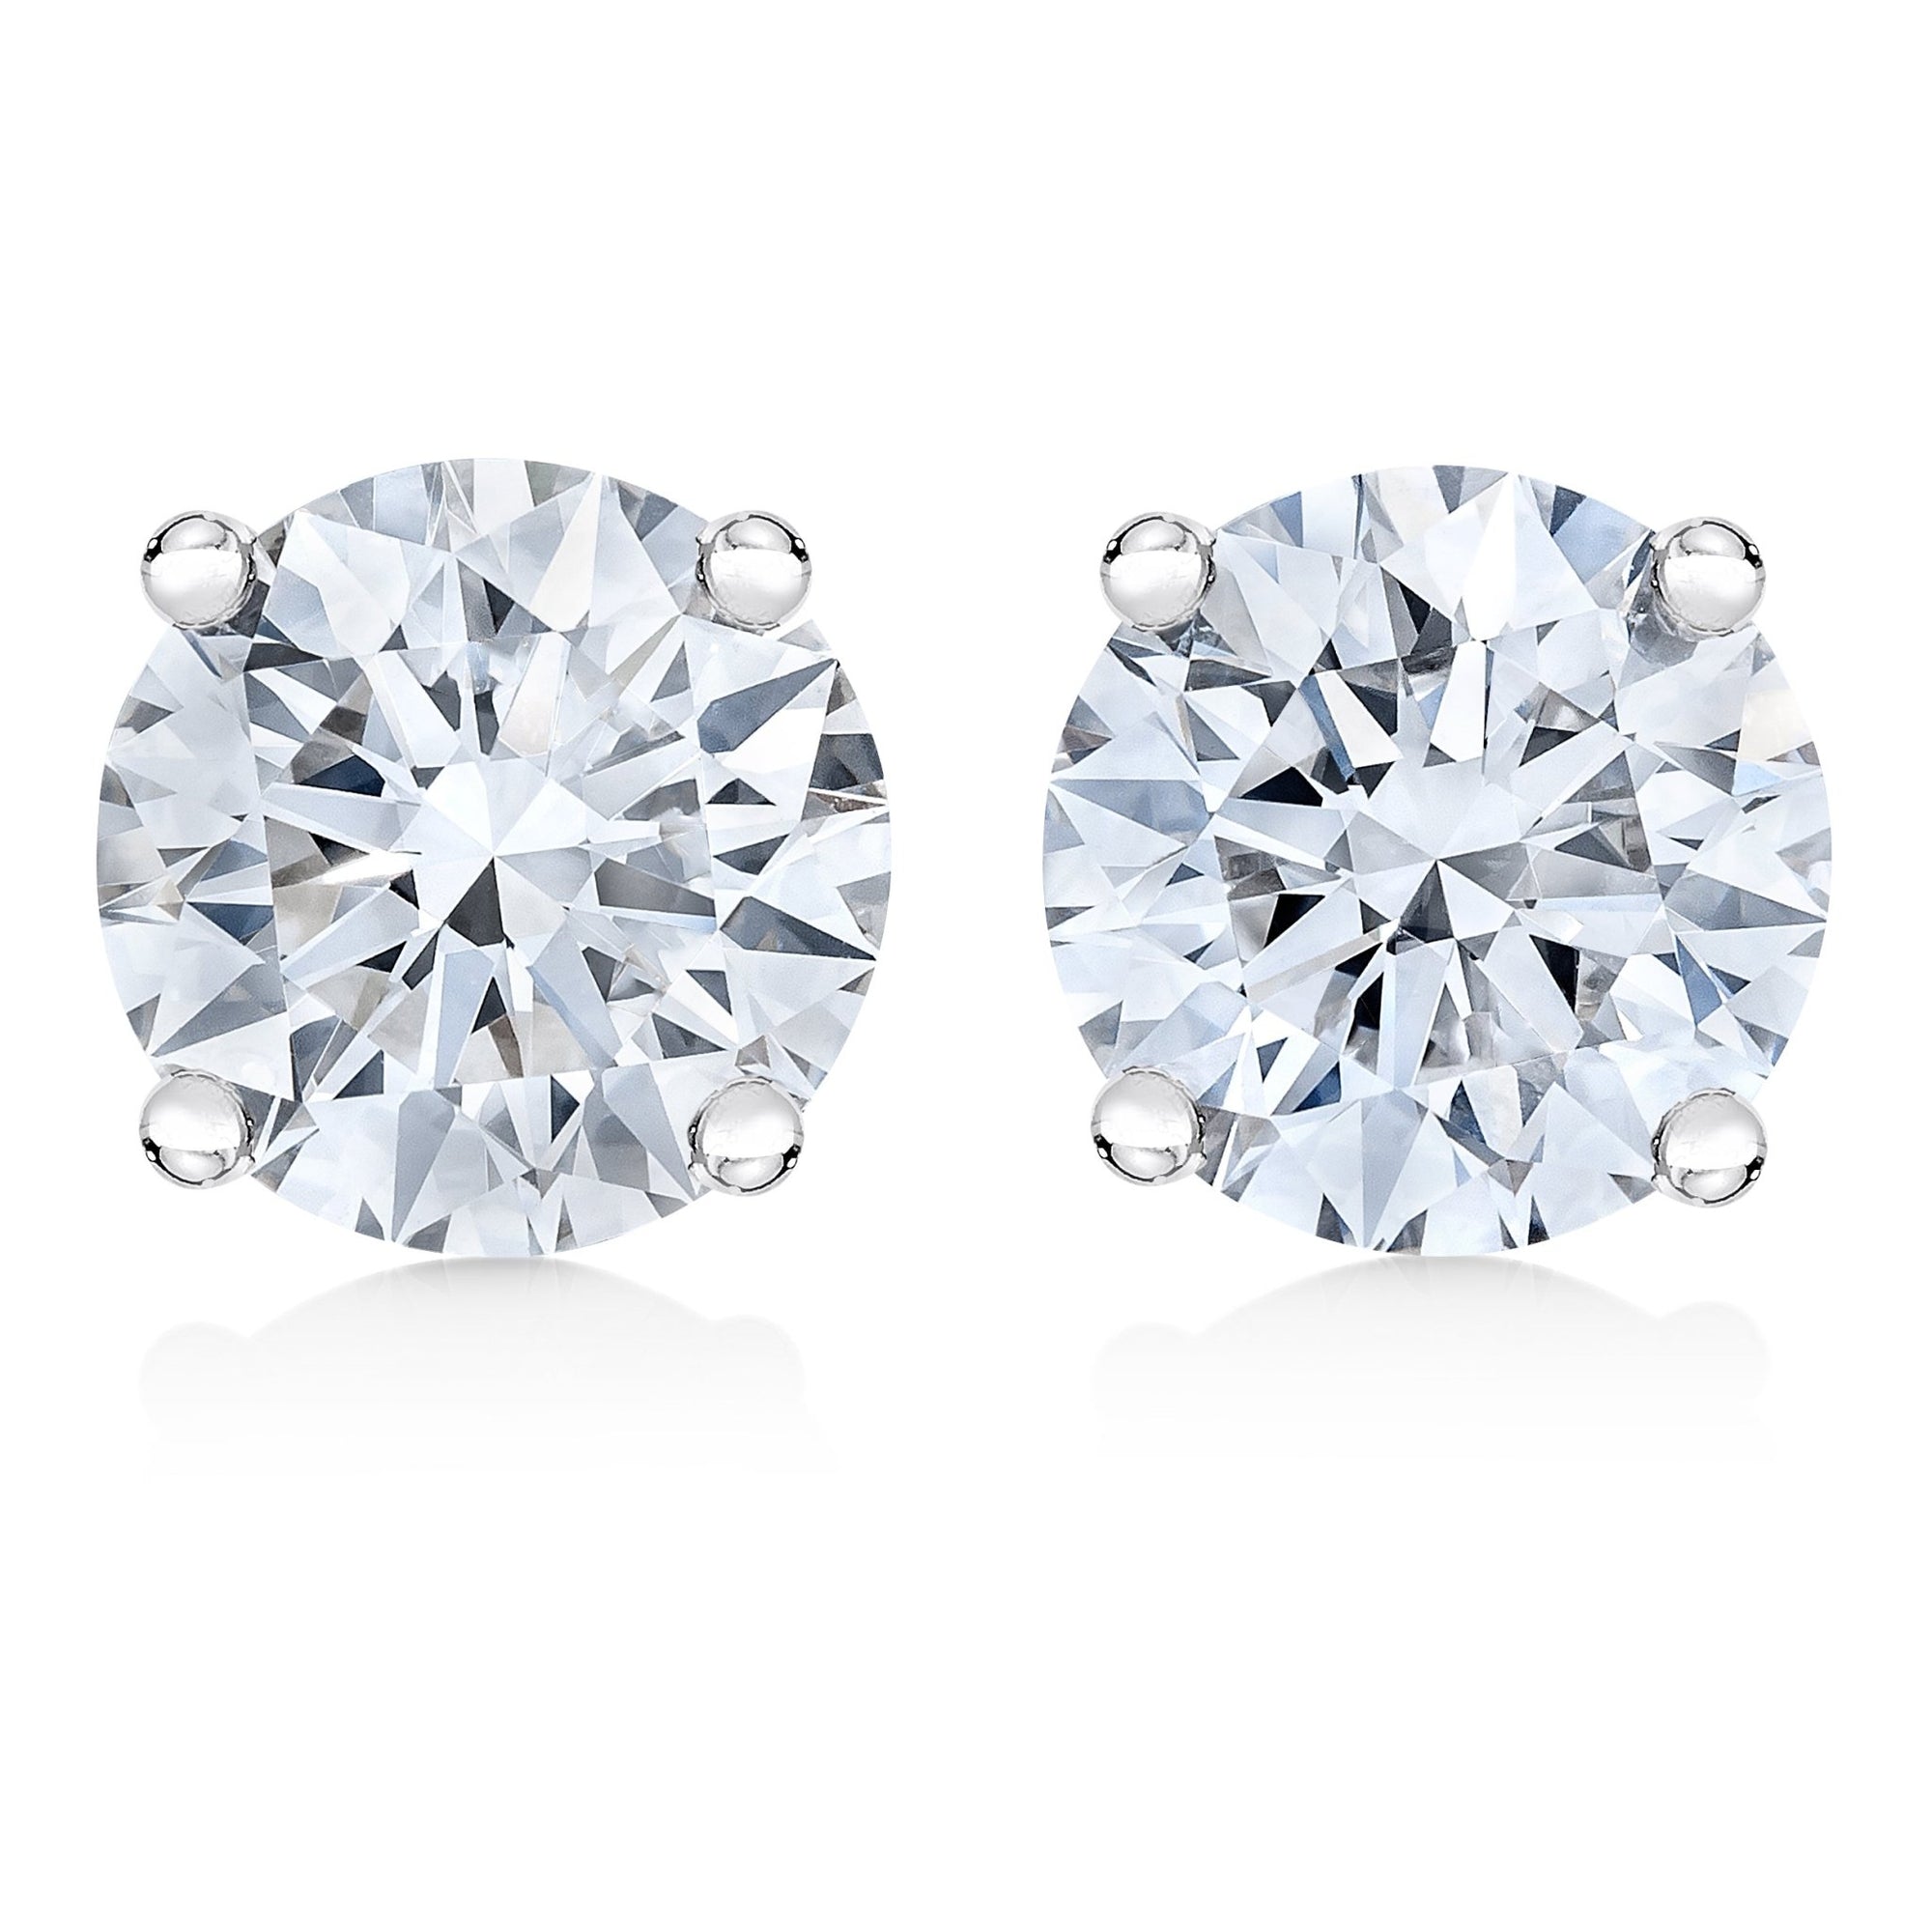 AGS Certified 14K White Gold 1.0 Cttw 4-Prong Set Brilliant Round-Cut Solitaire Diamond Push Back Stud Earrings (E-F Color, I1-I2 Clarity) - LinkagejewelrydesignLinkagejewelrydesign